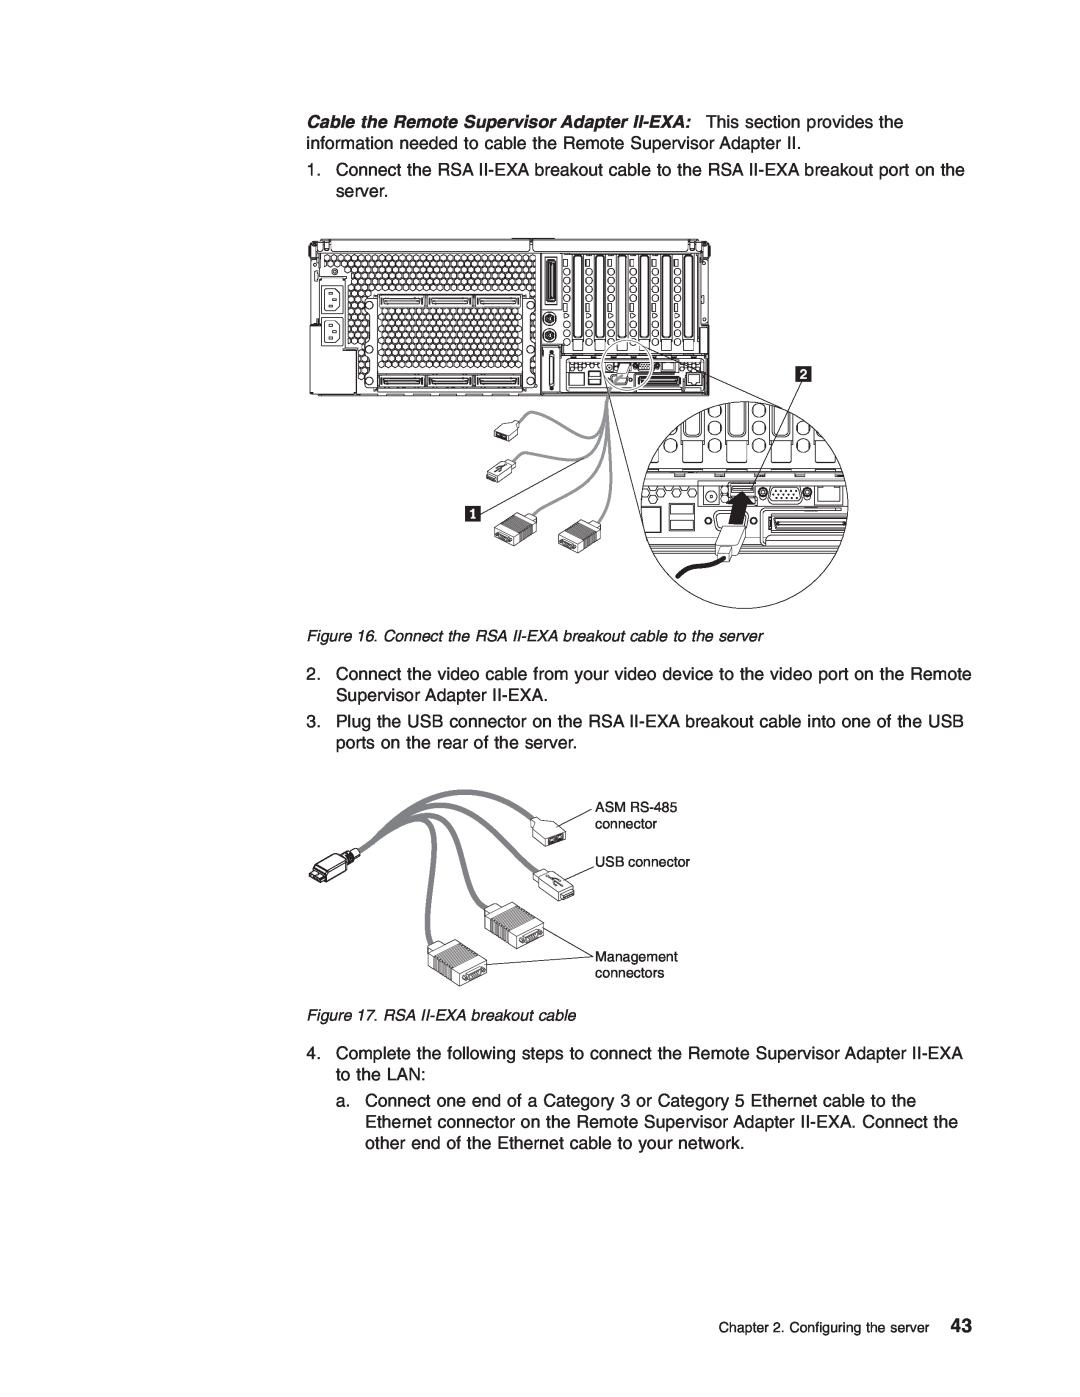 IBM 8870 manual Connect the RSA II-EXA breakout cable to the server 